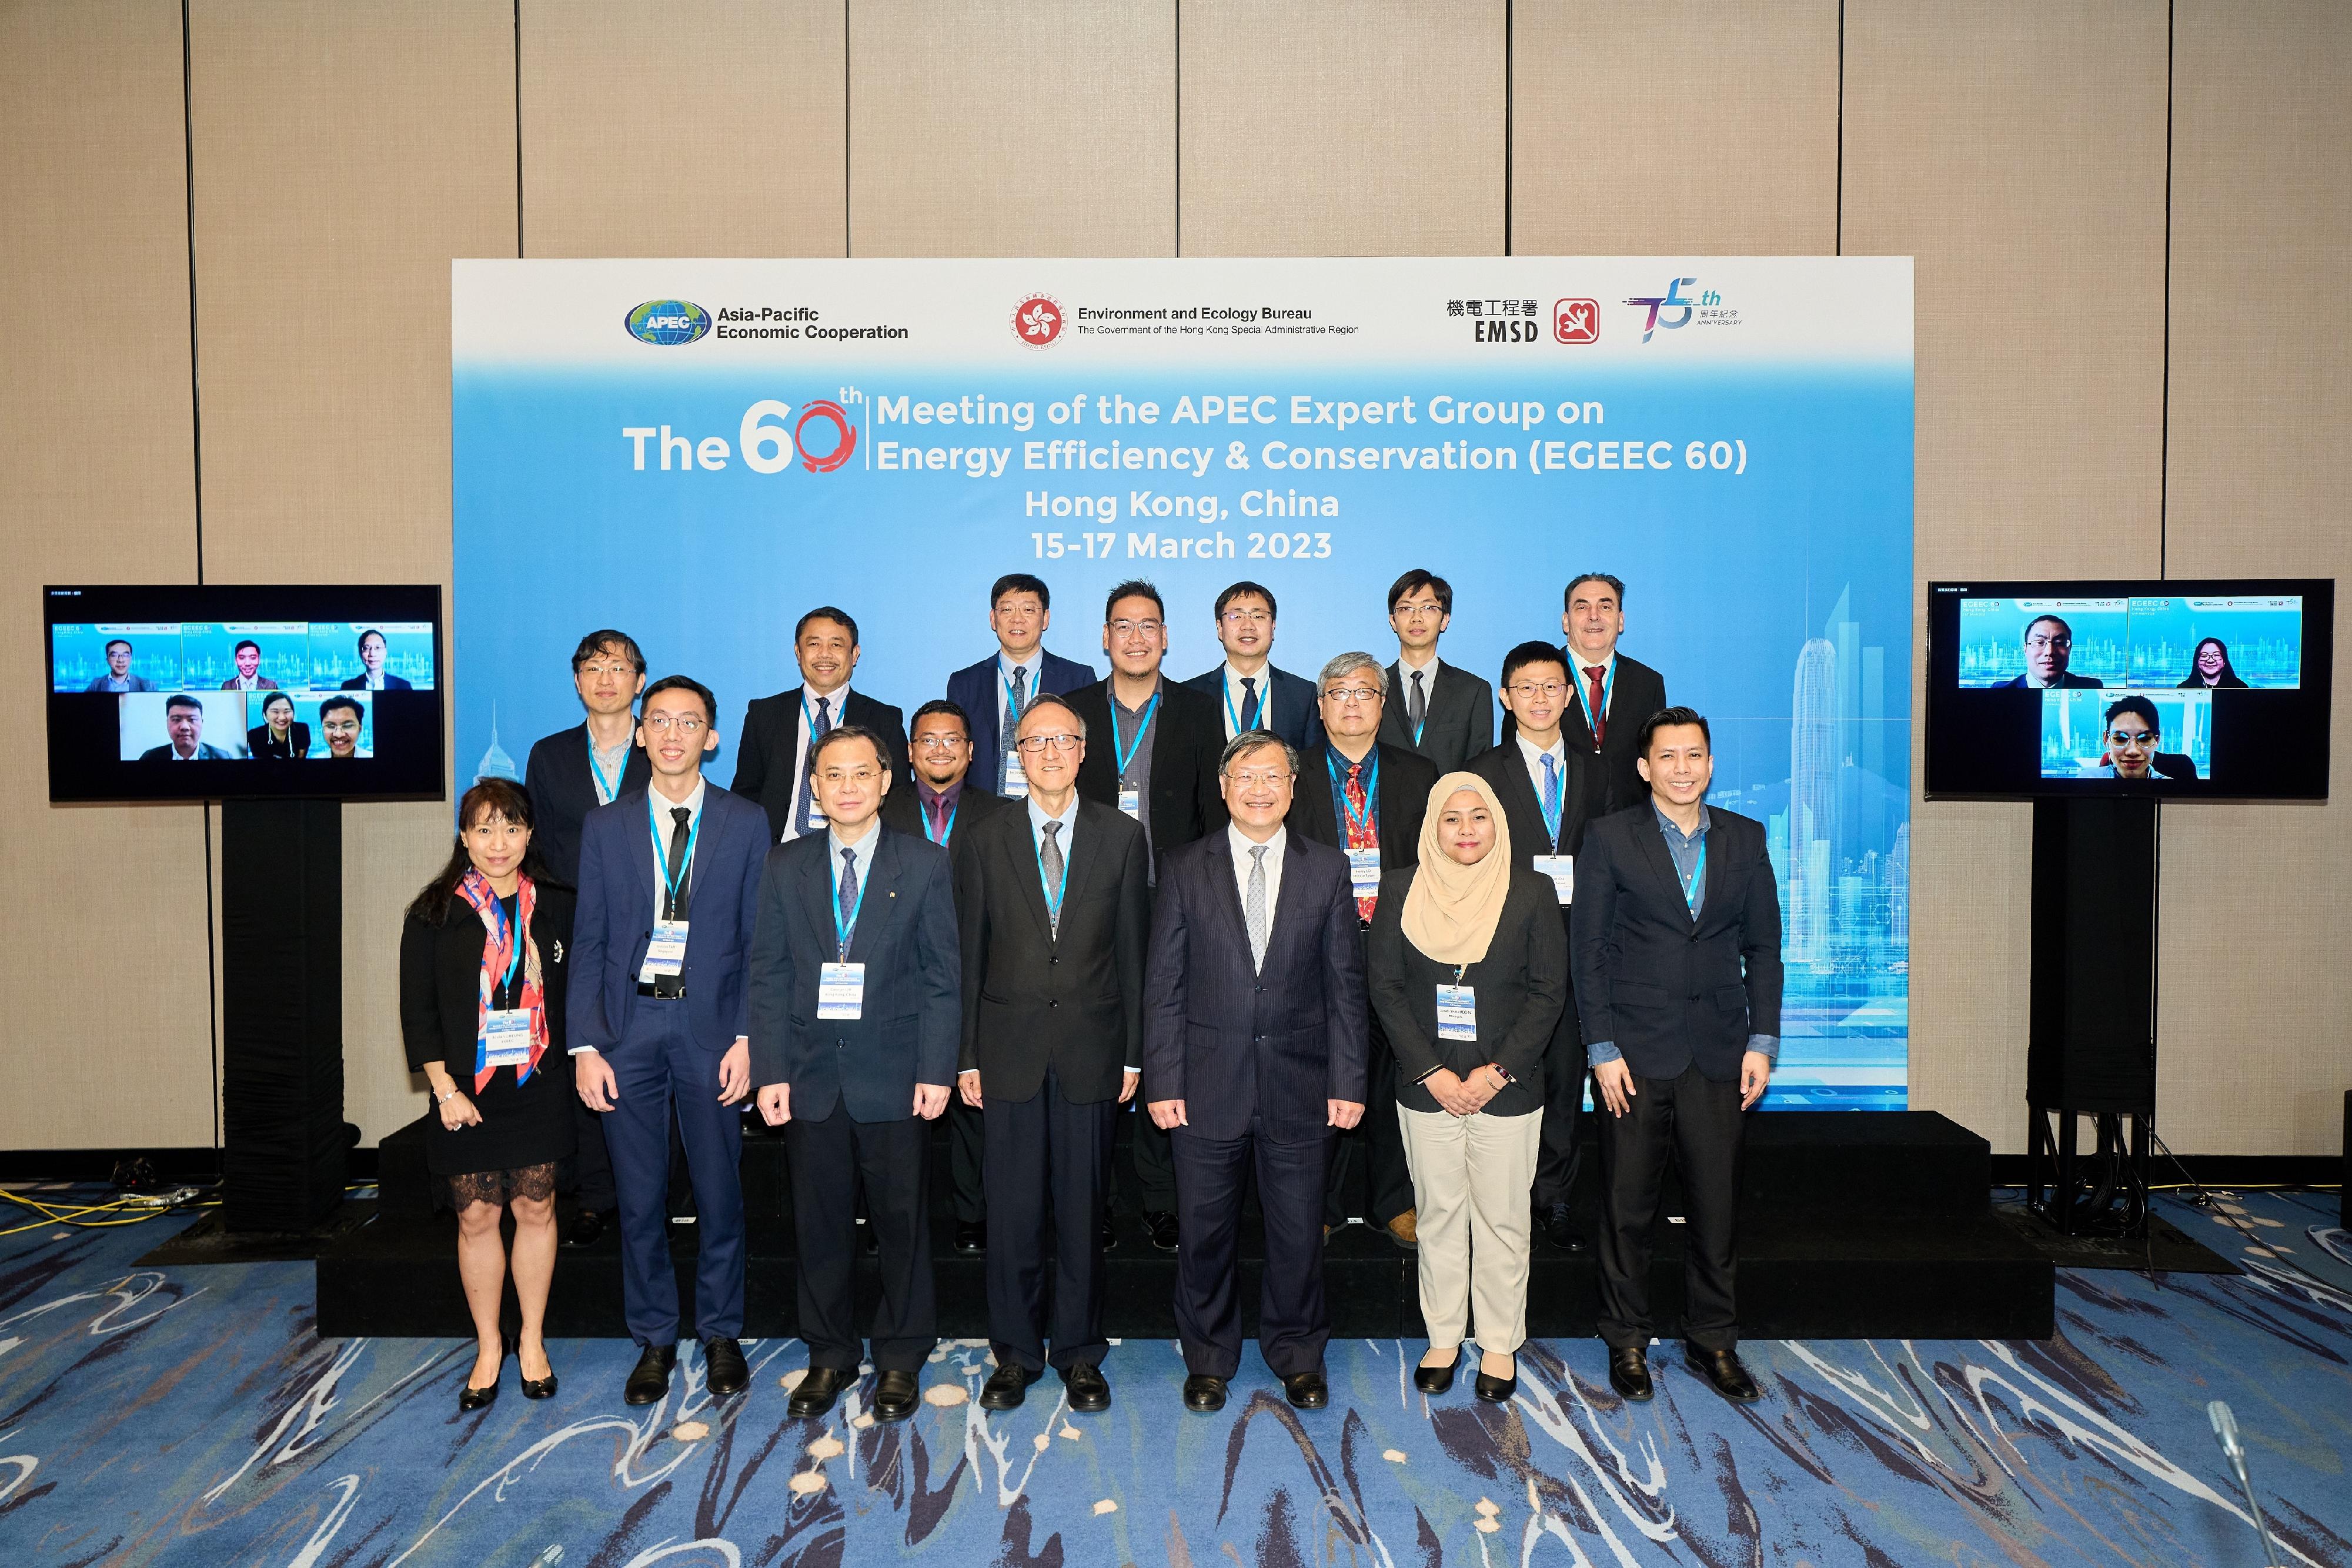 Held in Hong Kong in hybrid mode, the 60th Meeting of Expert Group on Energy Efficiency and Conservation of the Asia-Pacific Economic Cooperation concluded today (March 16). Photo shows the Director of Electrical and Mechanical Services, Mr Pang Yiu-hung (first row, fifth left), with attendees